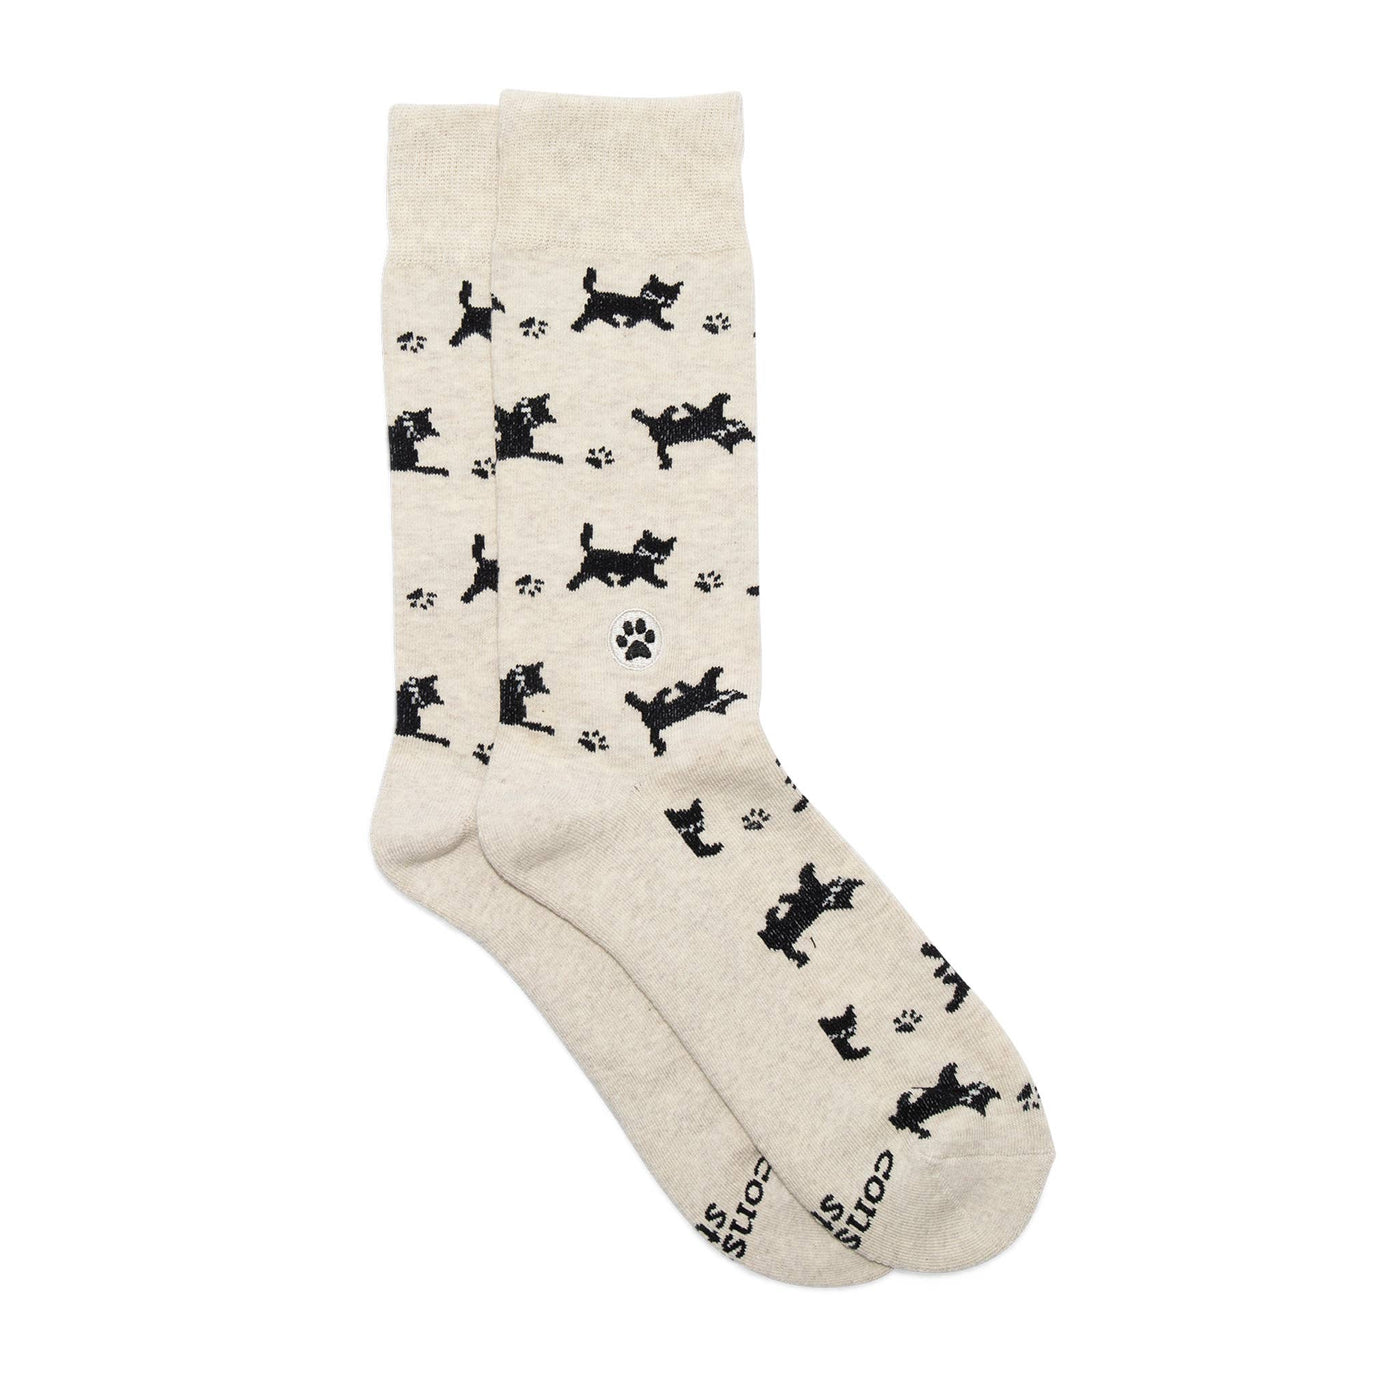 Socks that Save Cats (Beige Cats)